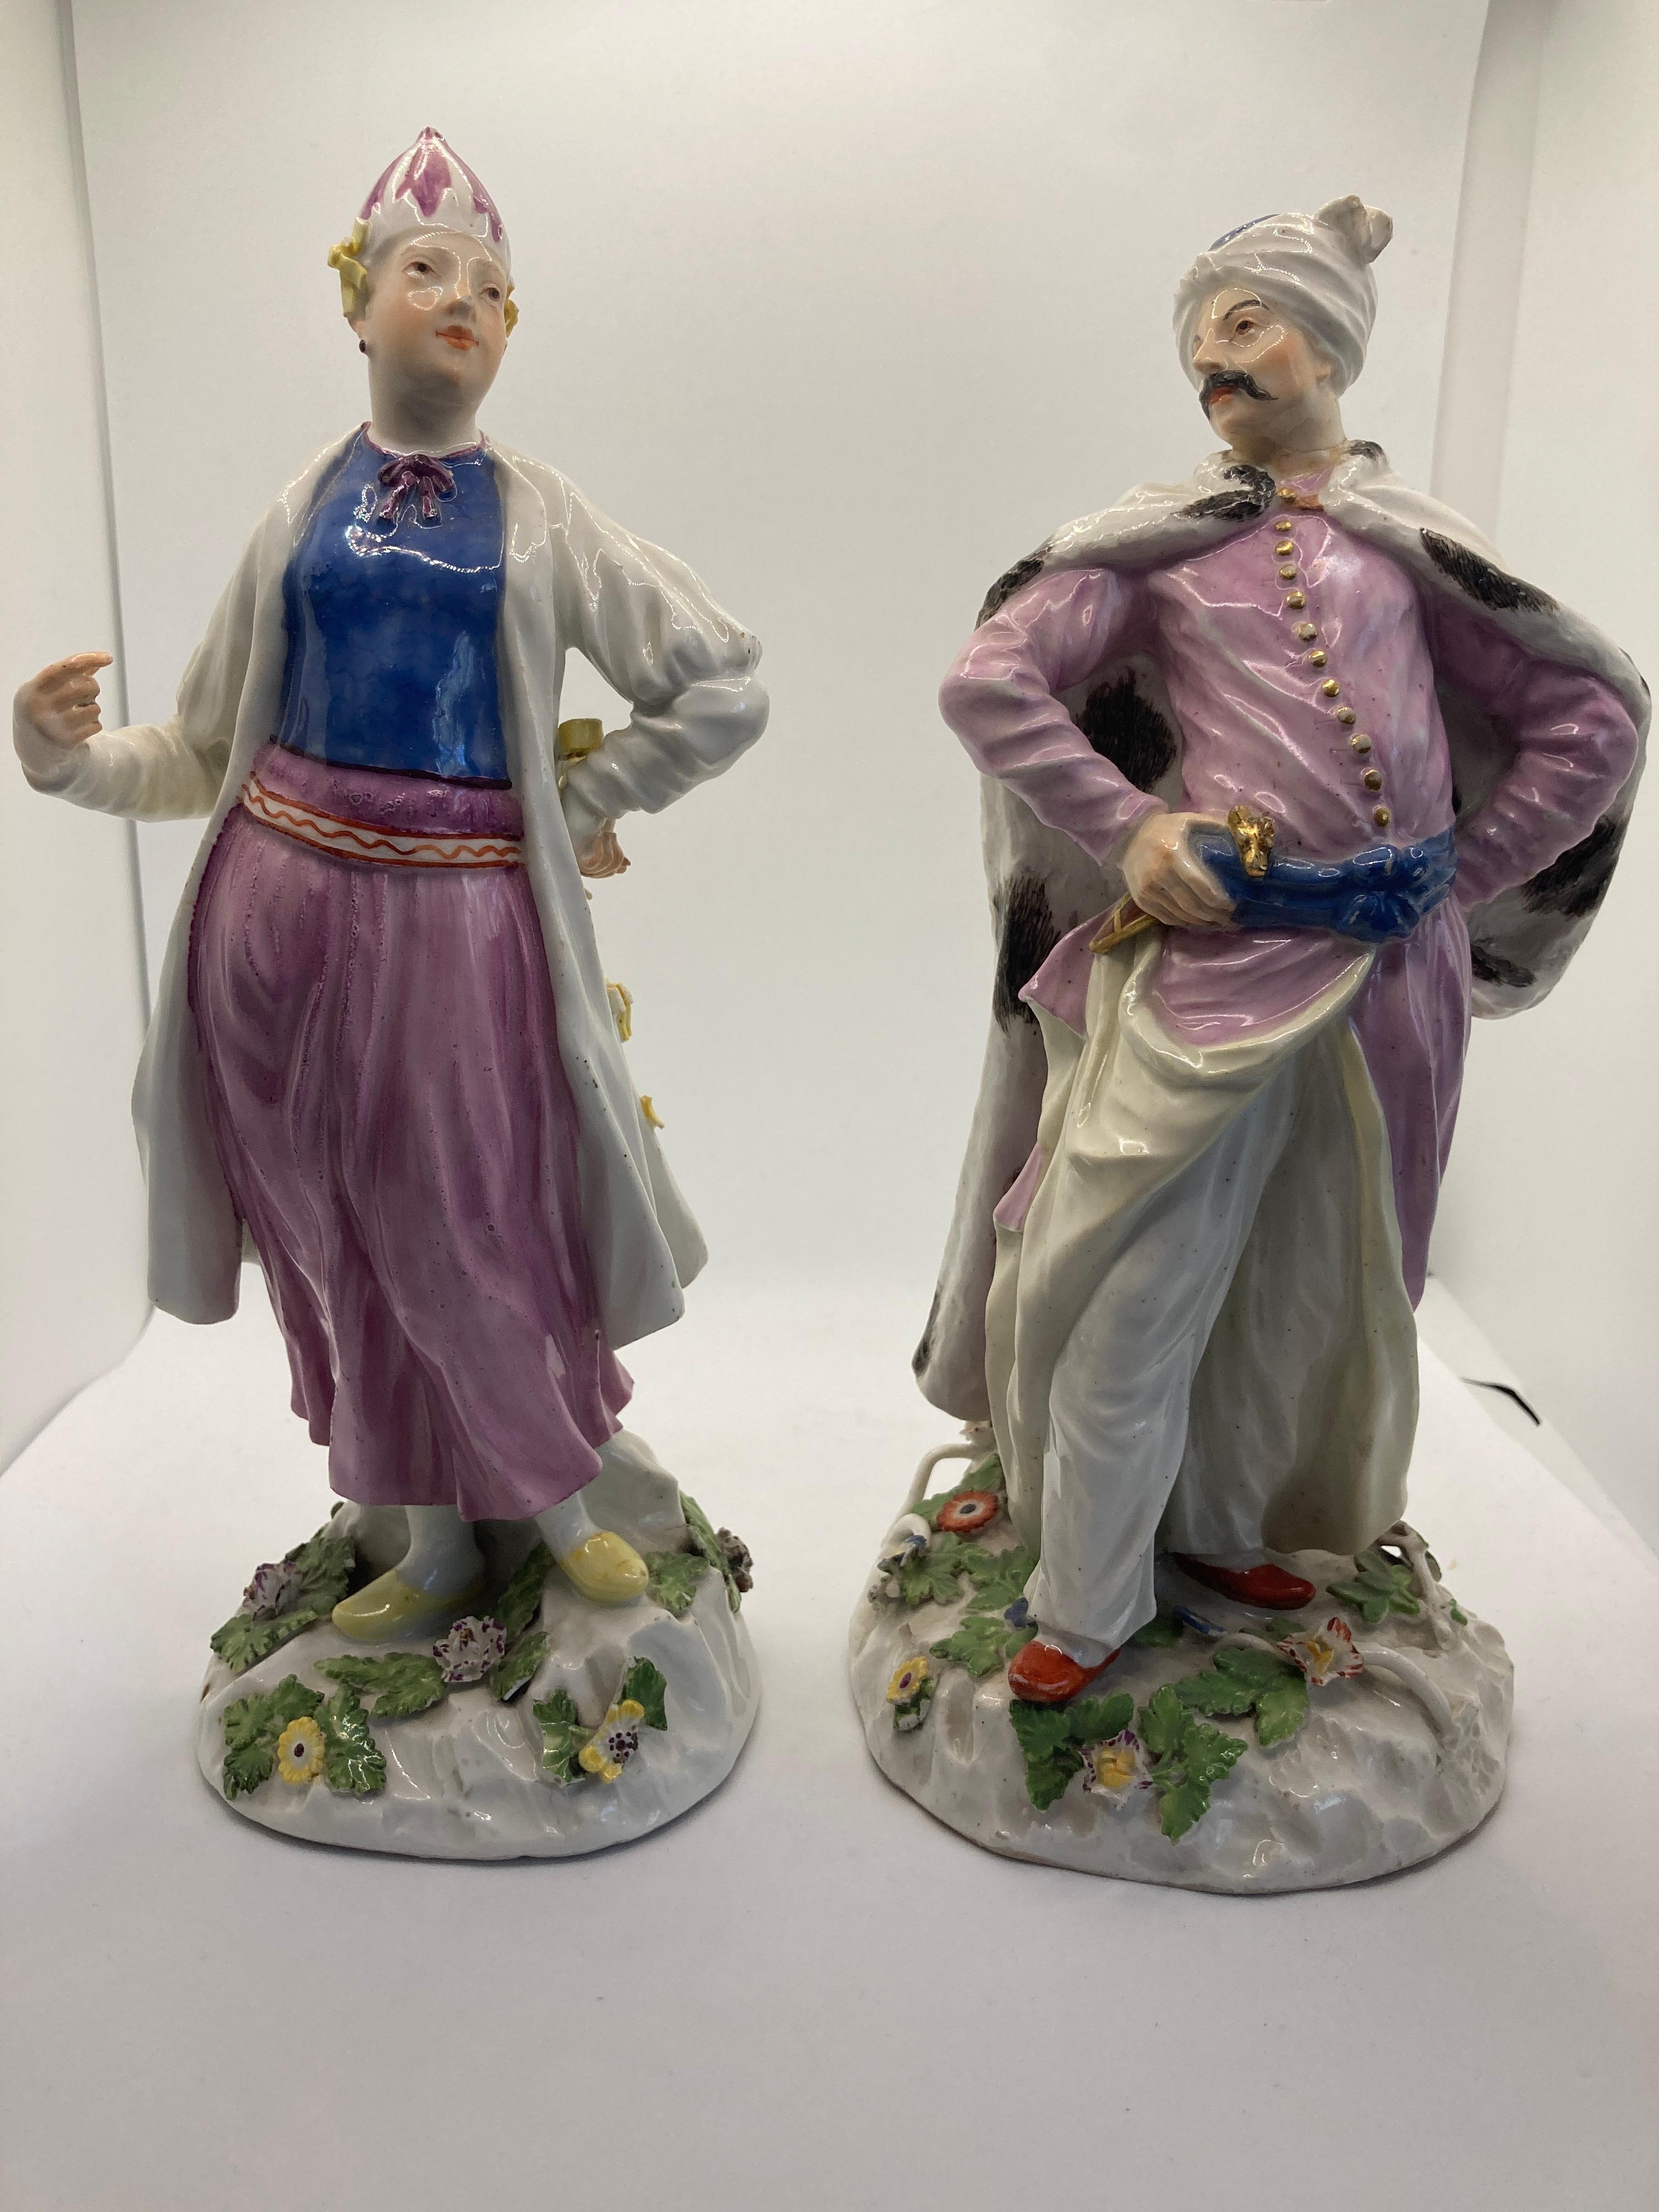 18th Century Meissen Porcelain Figures, Turkish / Persian Lady & Gentleman. circa 1755 

Both designed by Johann Joachim Kaendler, Rare and early examples of both models.

